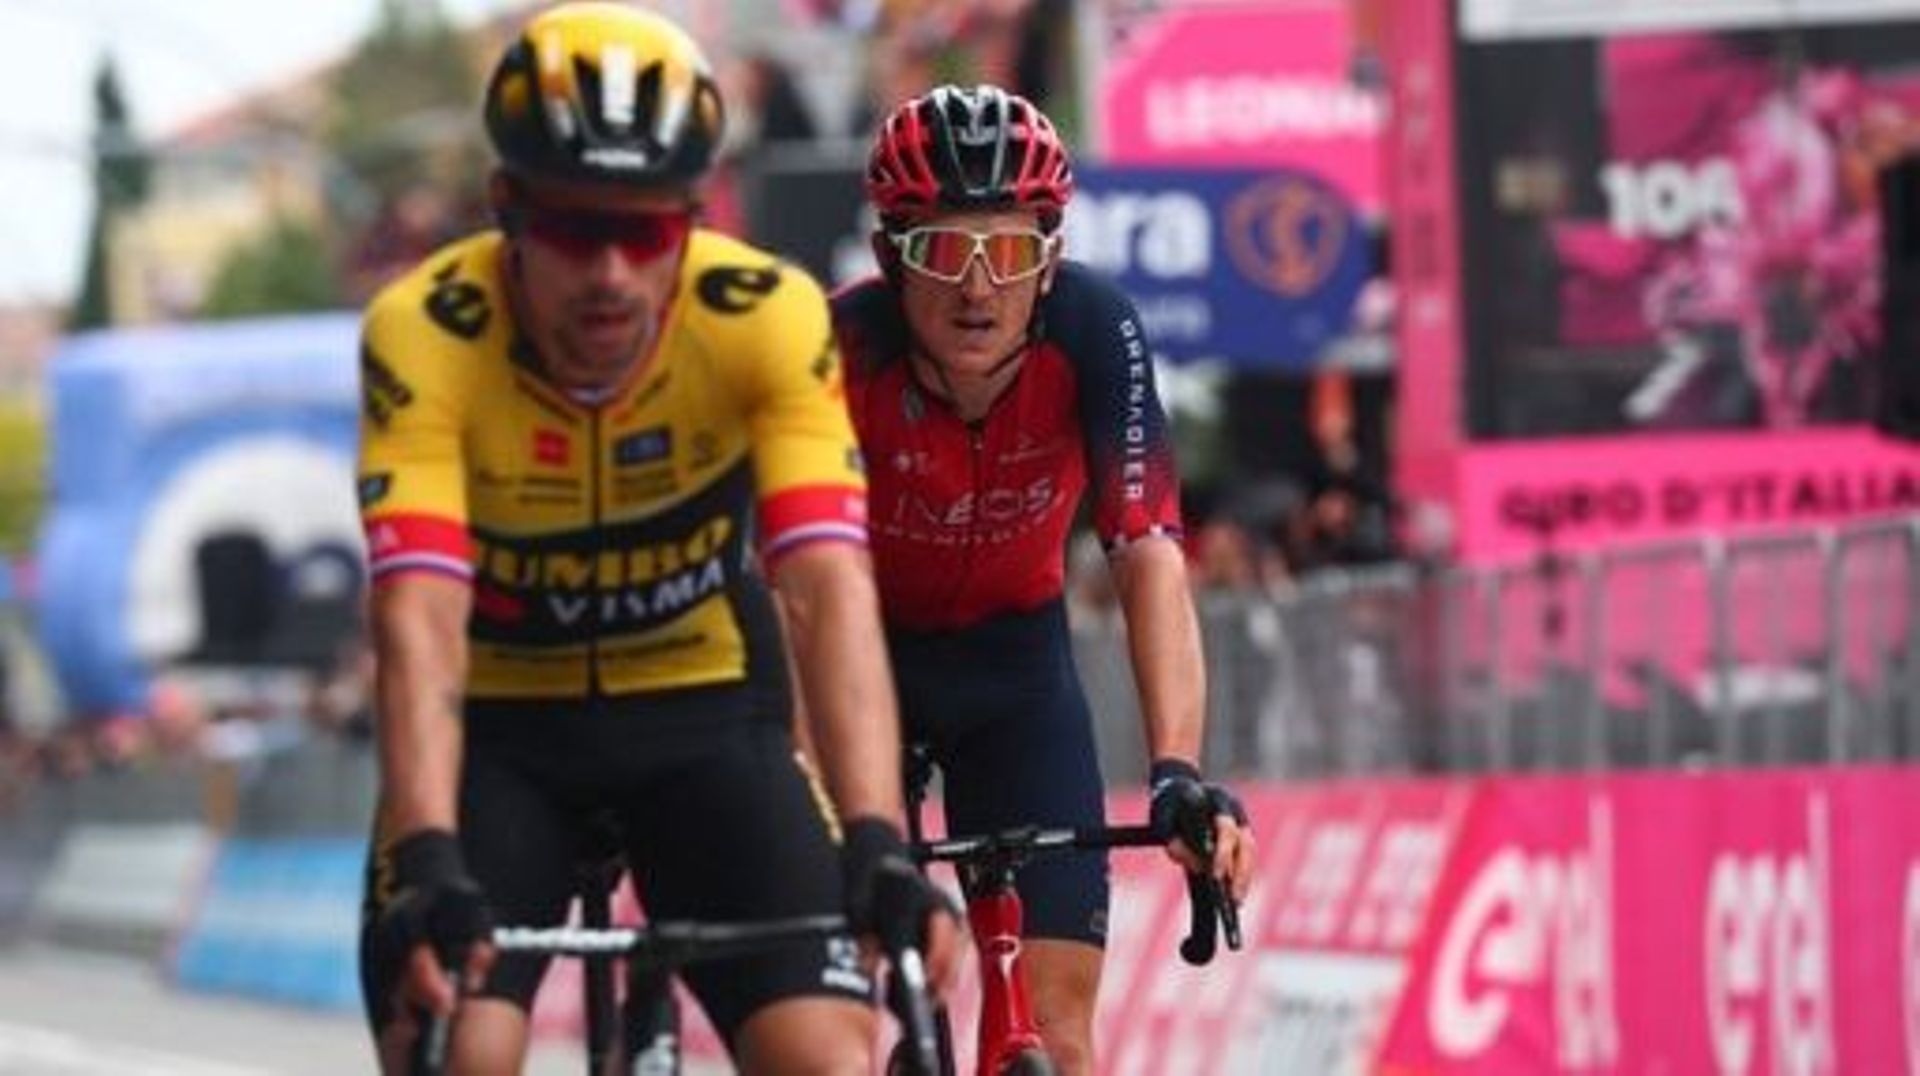 Jumbo-Visma’s Slovenian rider Primoz Roglic (L) and INEOS Grenadiers’s British rider Geraint Thomas, cross the finish line to respectiveely place 11th and 12th of the eighth stage of the Giro d’Italia 2023 cycling race, 207 km between Terni and Fossombron